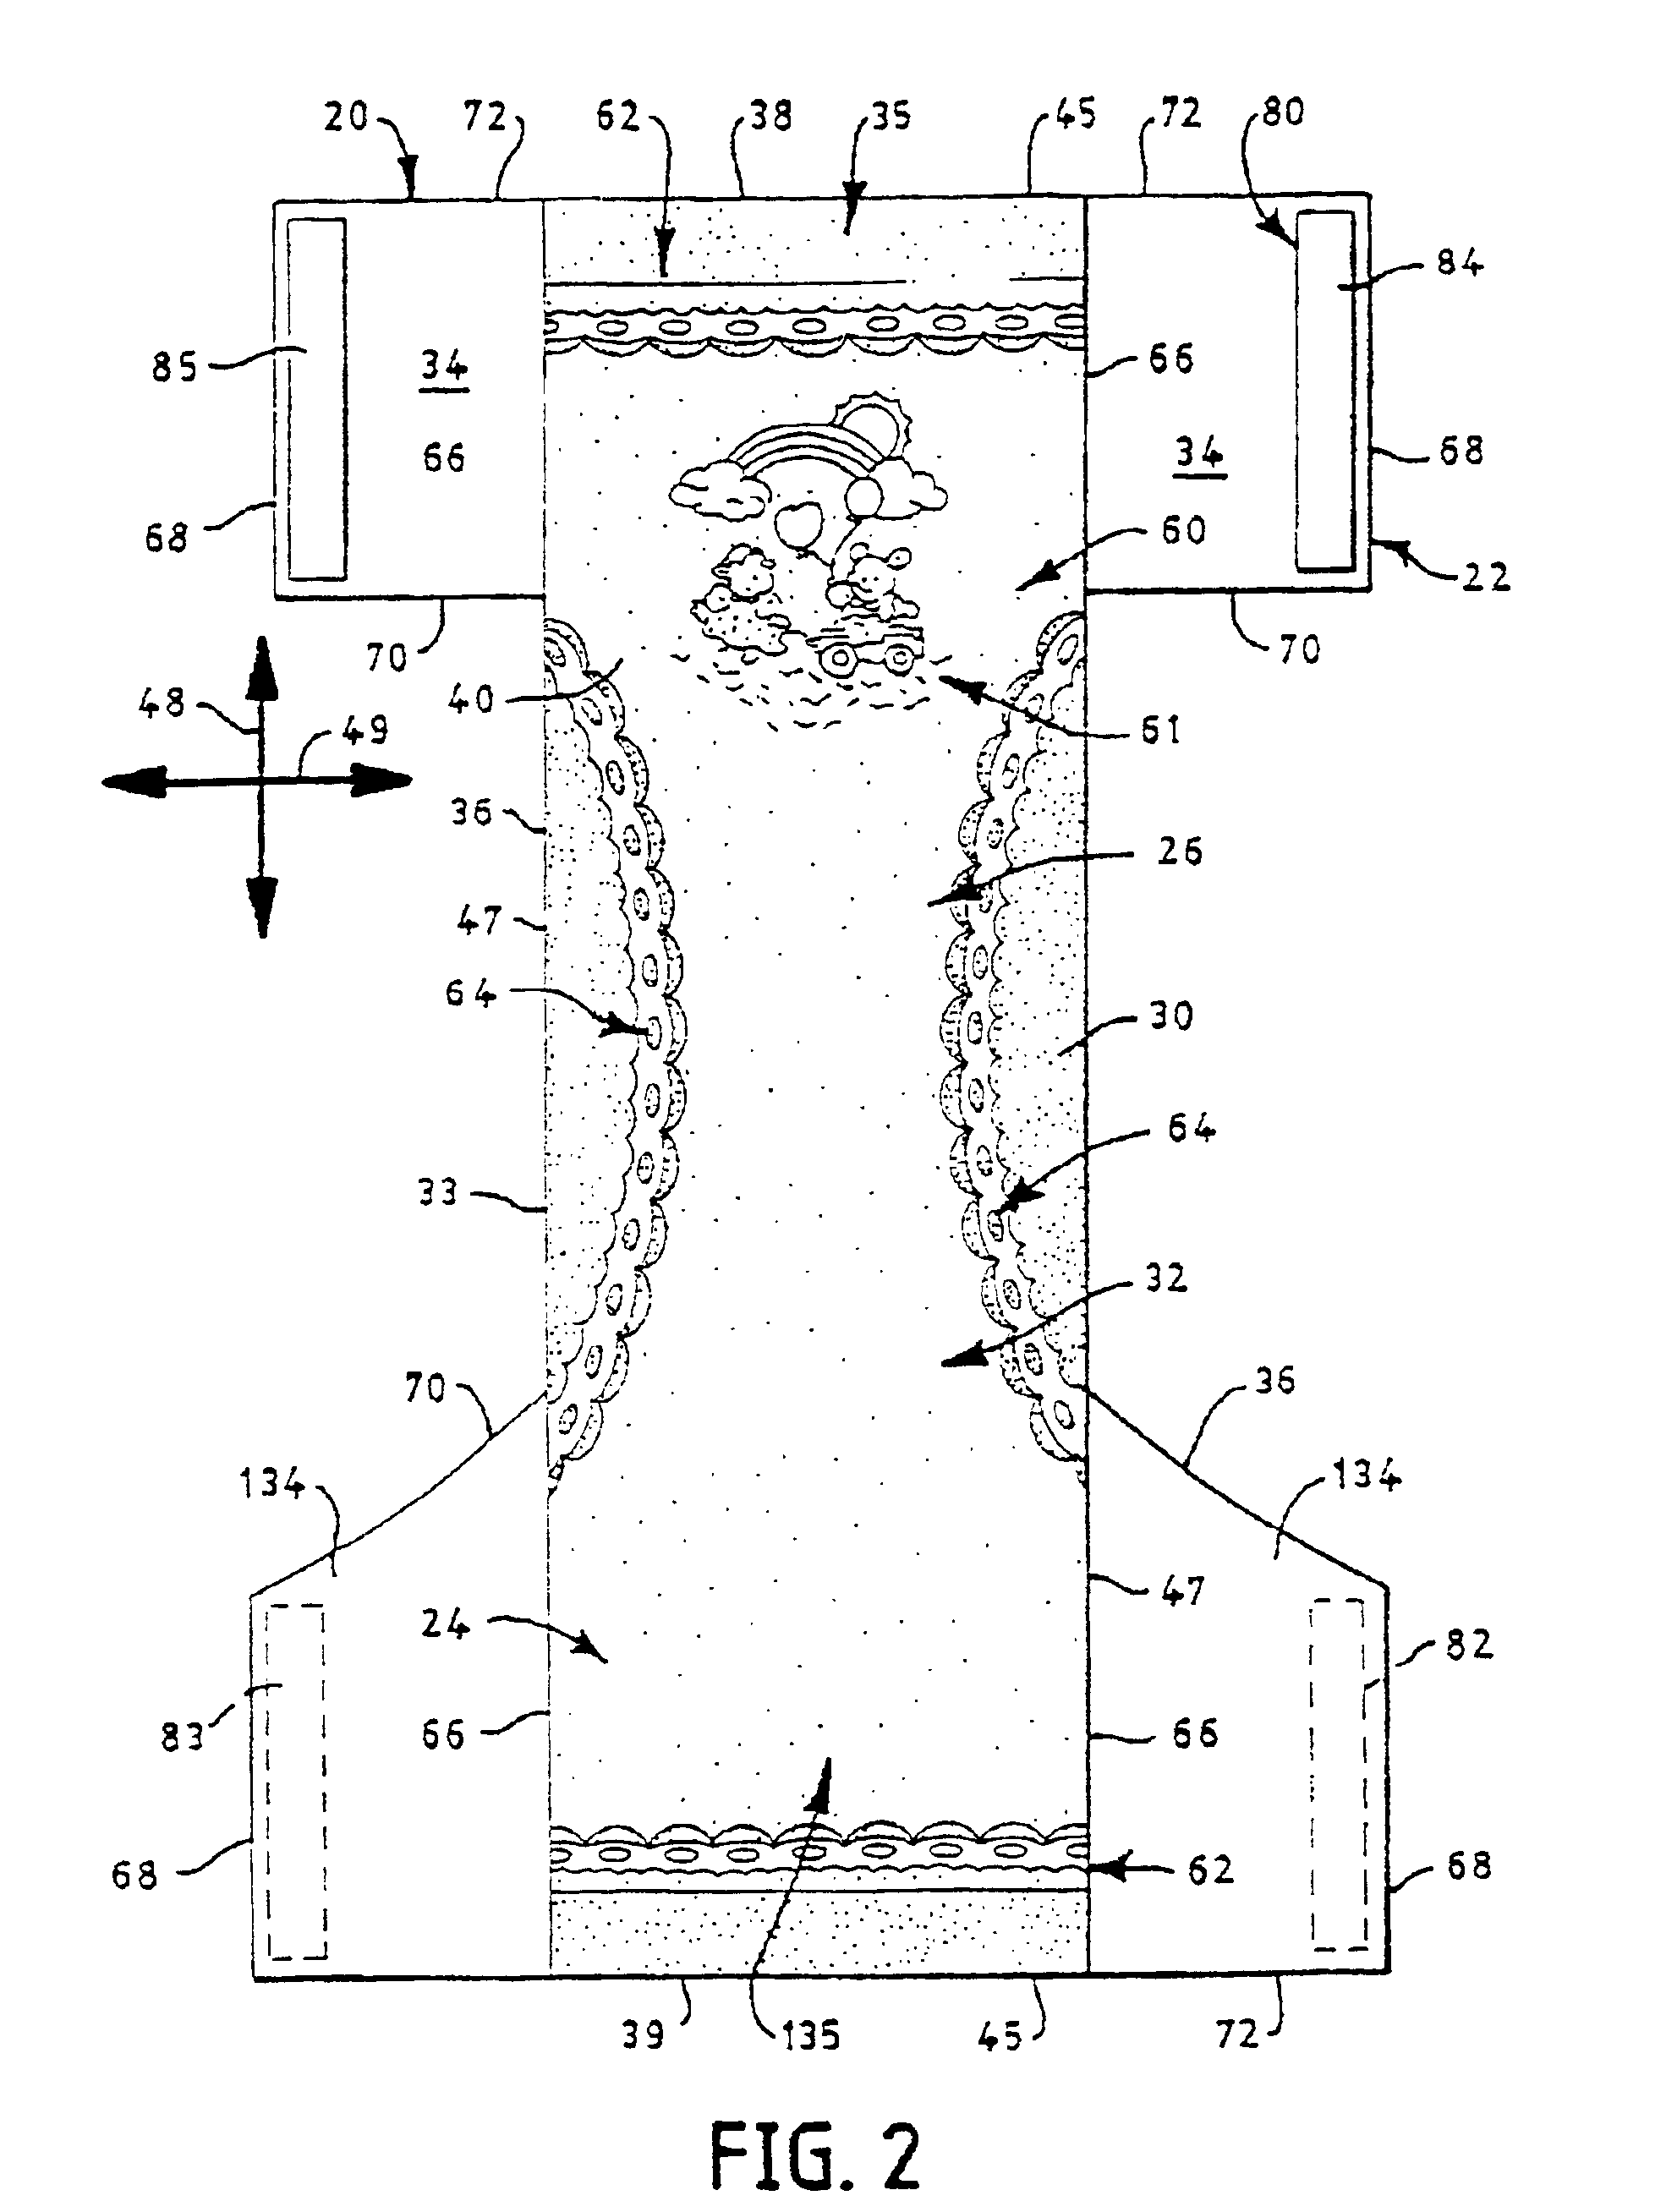 Mechanical fastening system for an absorbent article